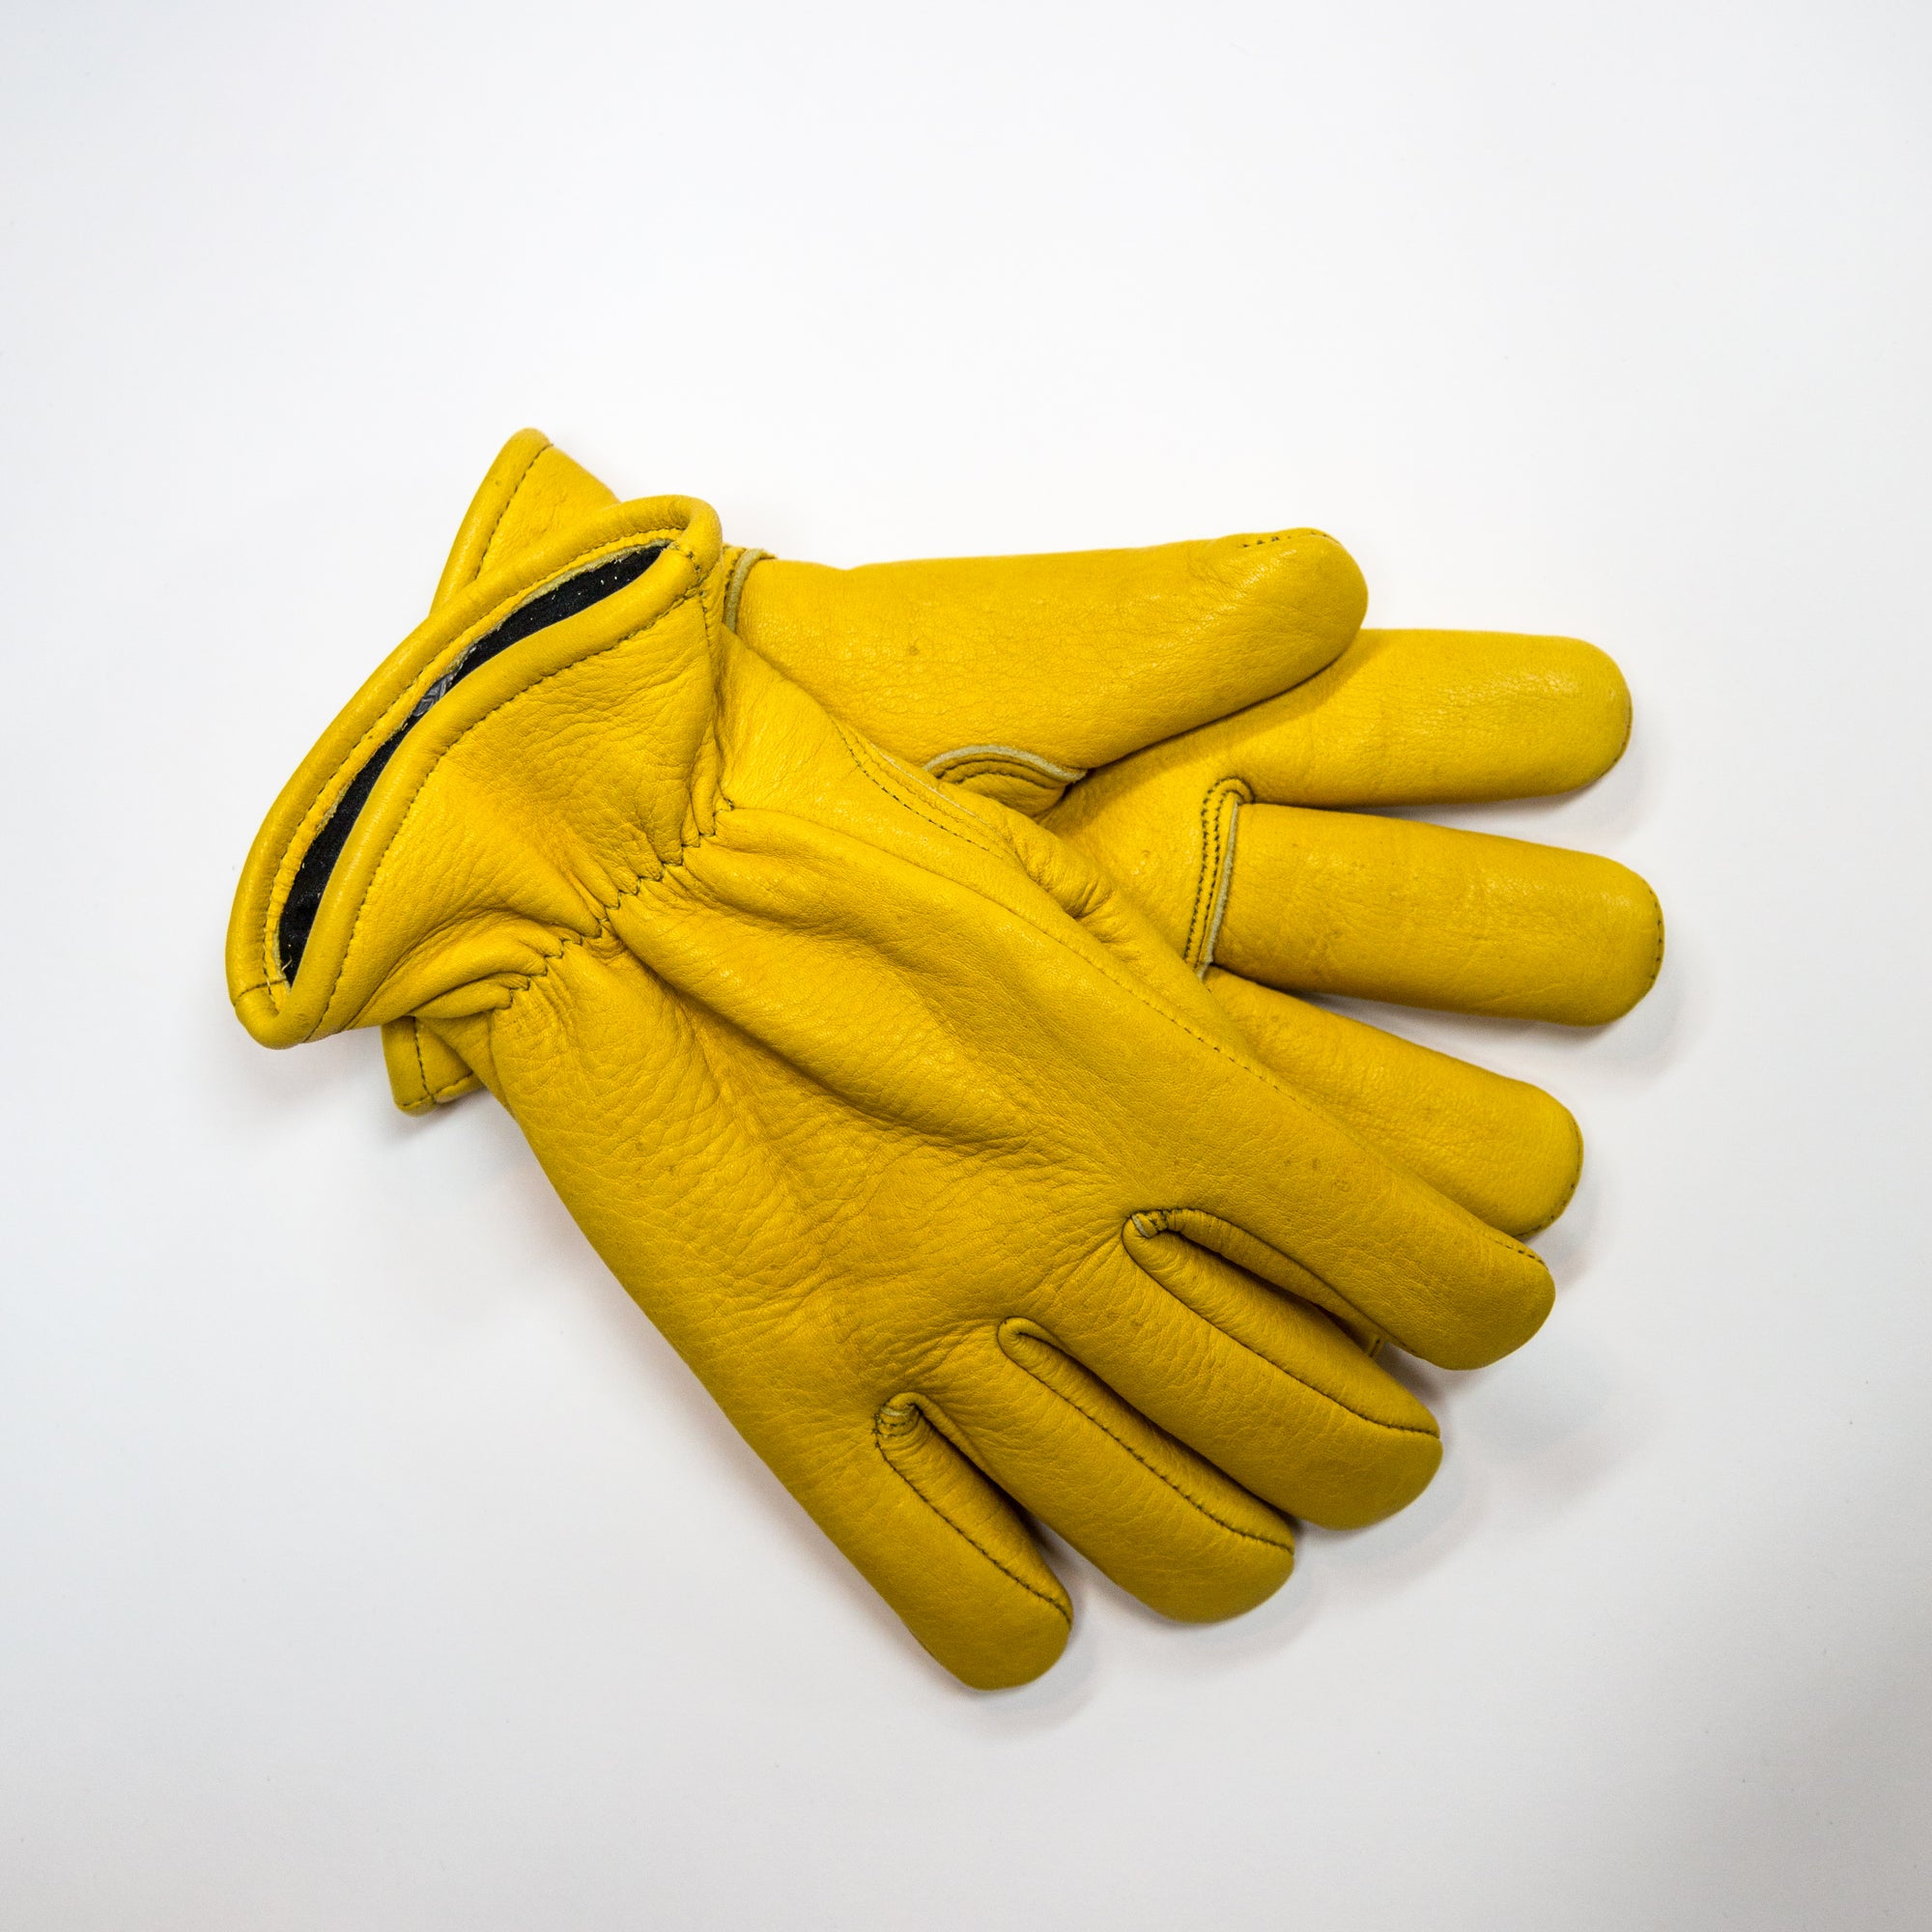 Churchill Thinsulate Lined Elkskin Gloves with Sympatex